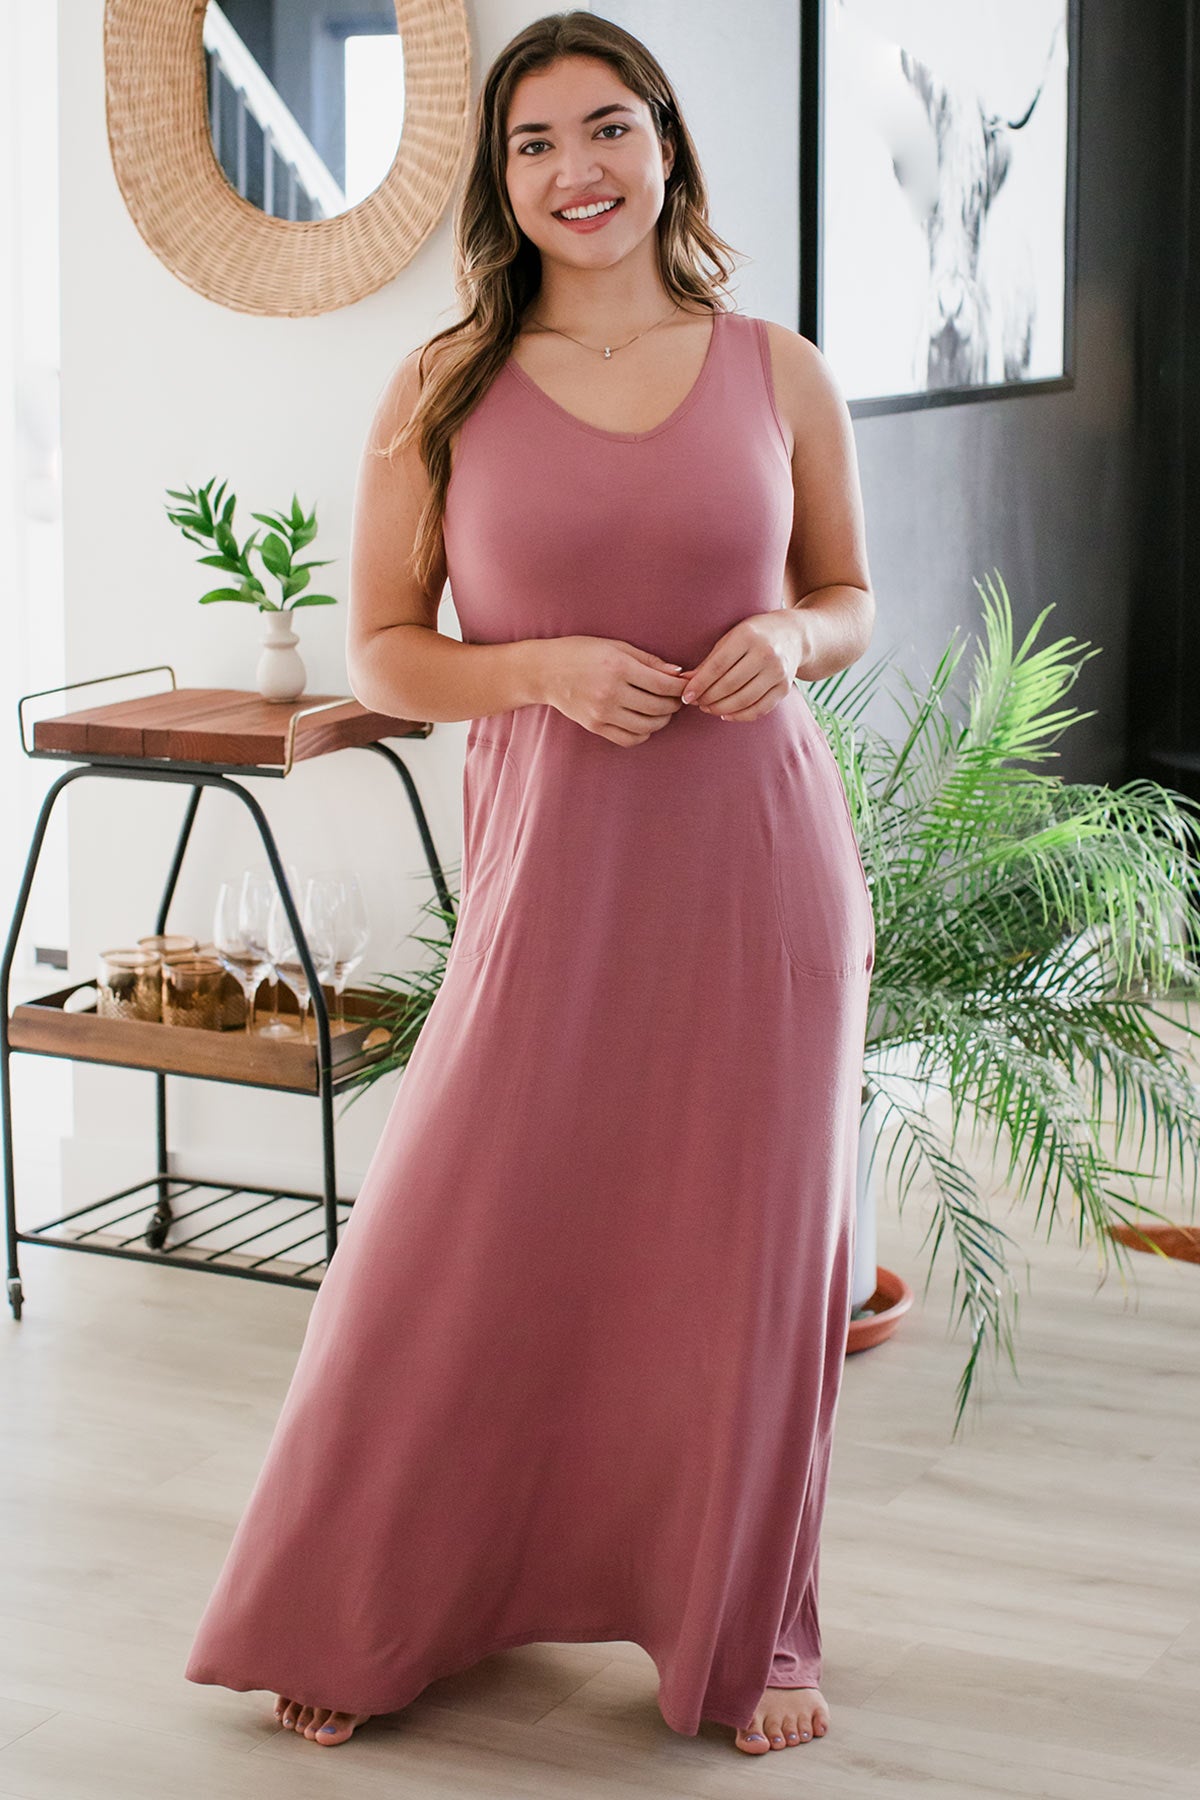 A woman standing with her hips tilted to the side and both her hands held together in front of her, wearing Yala Kinsley Sleeveless Bamboo Maxi Dress in Rose